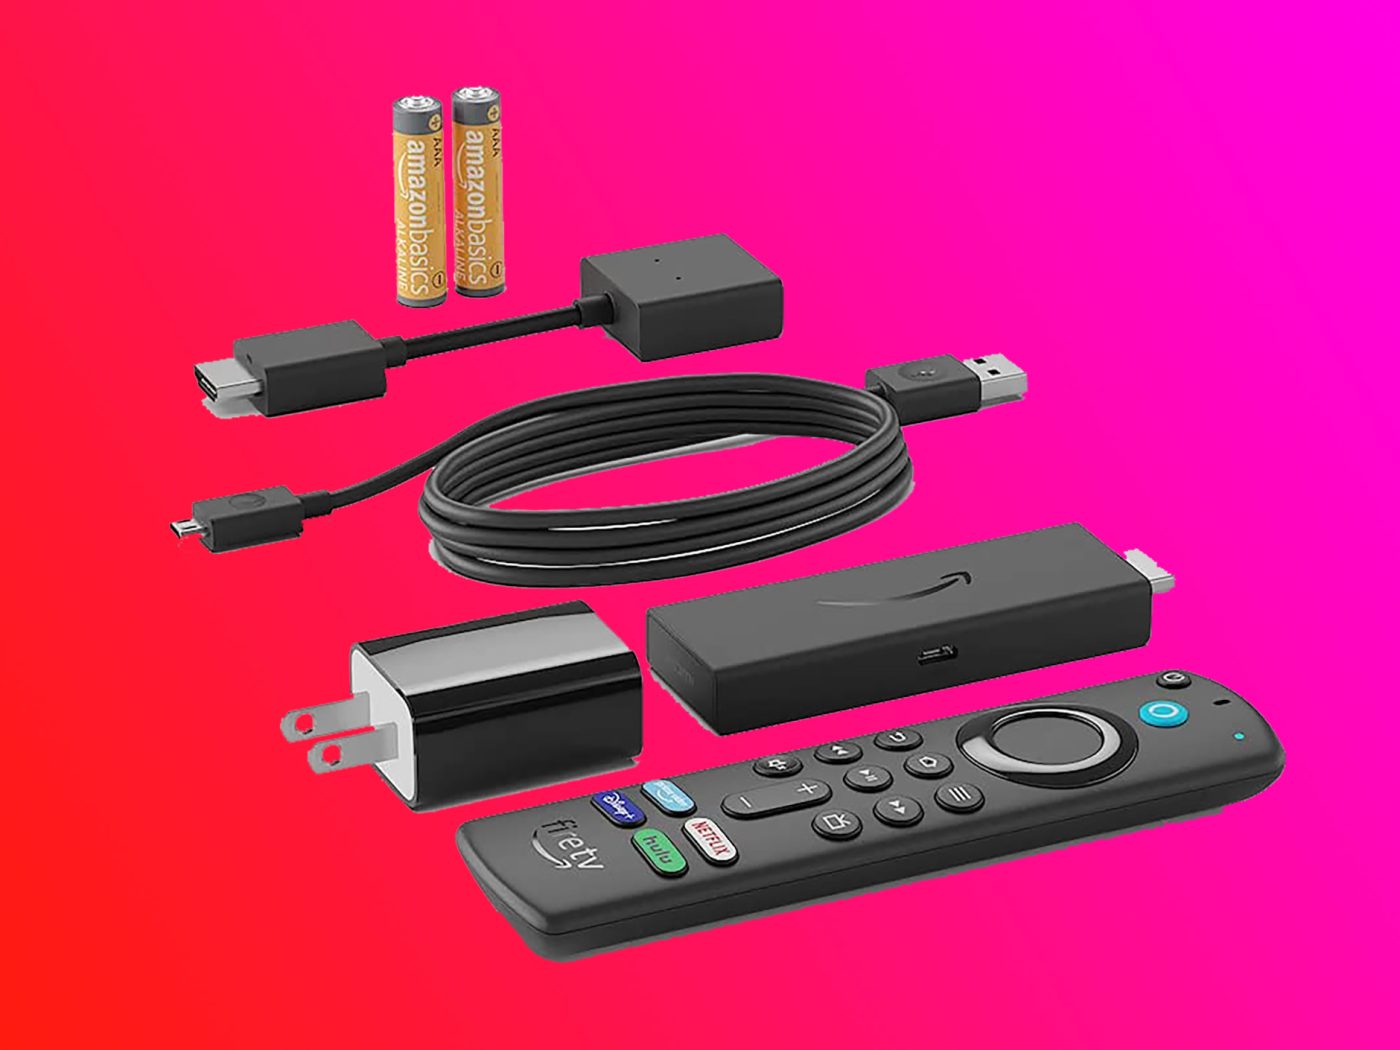 Has Certified Refurbished Fire TV Sticks Starting At Just $26.99